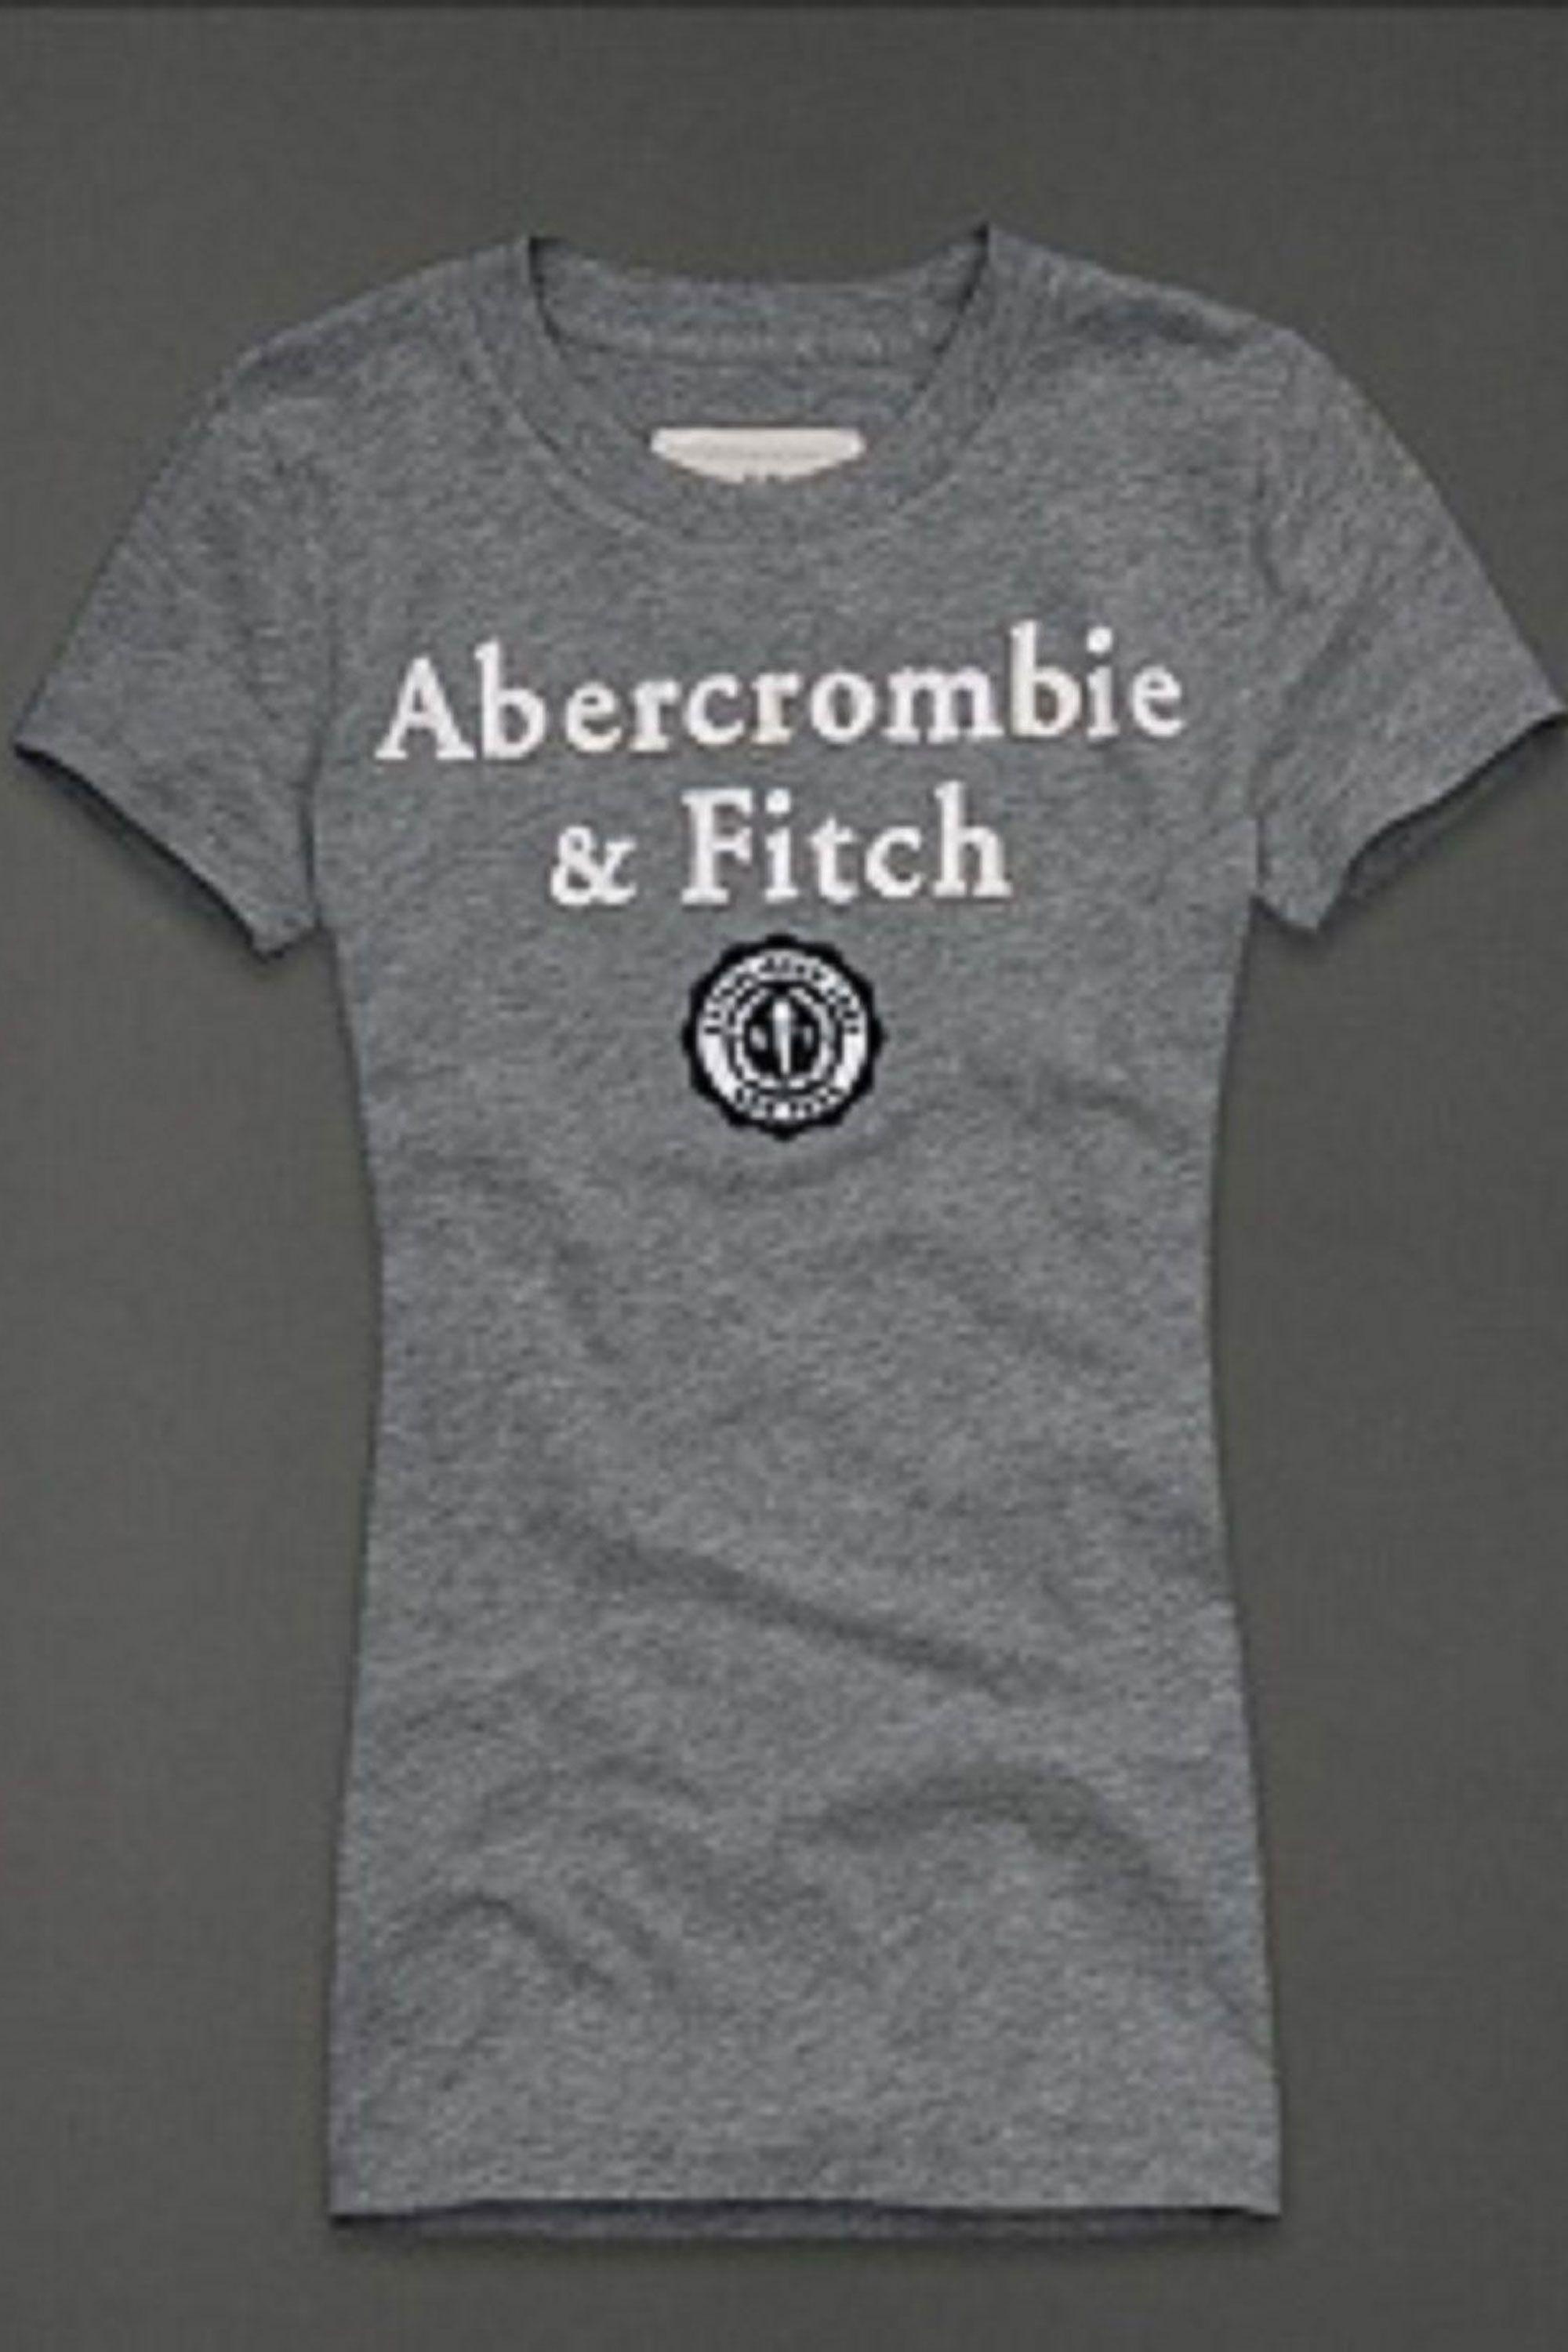 Abercrombie Clothing Logo - Things From Abercrombie & Fitch You Used to Be Obsessed With